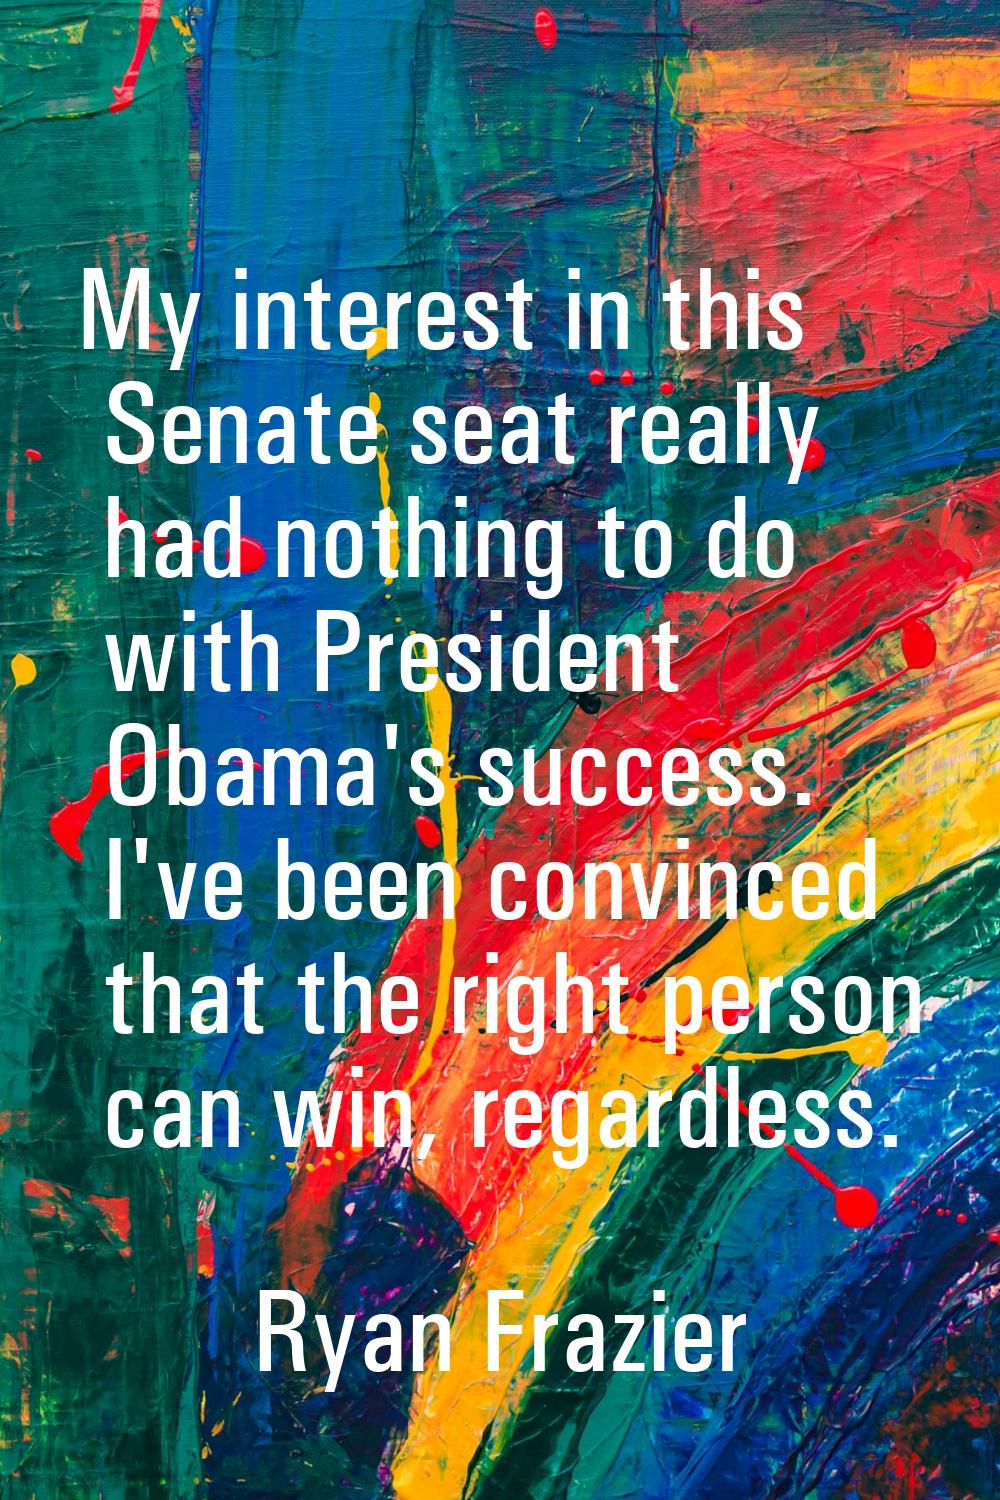 My interest in this Senate seat really had nothing to do with President Obama's success. I've been 